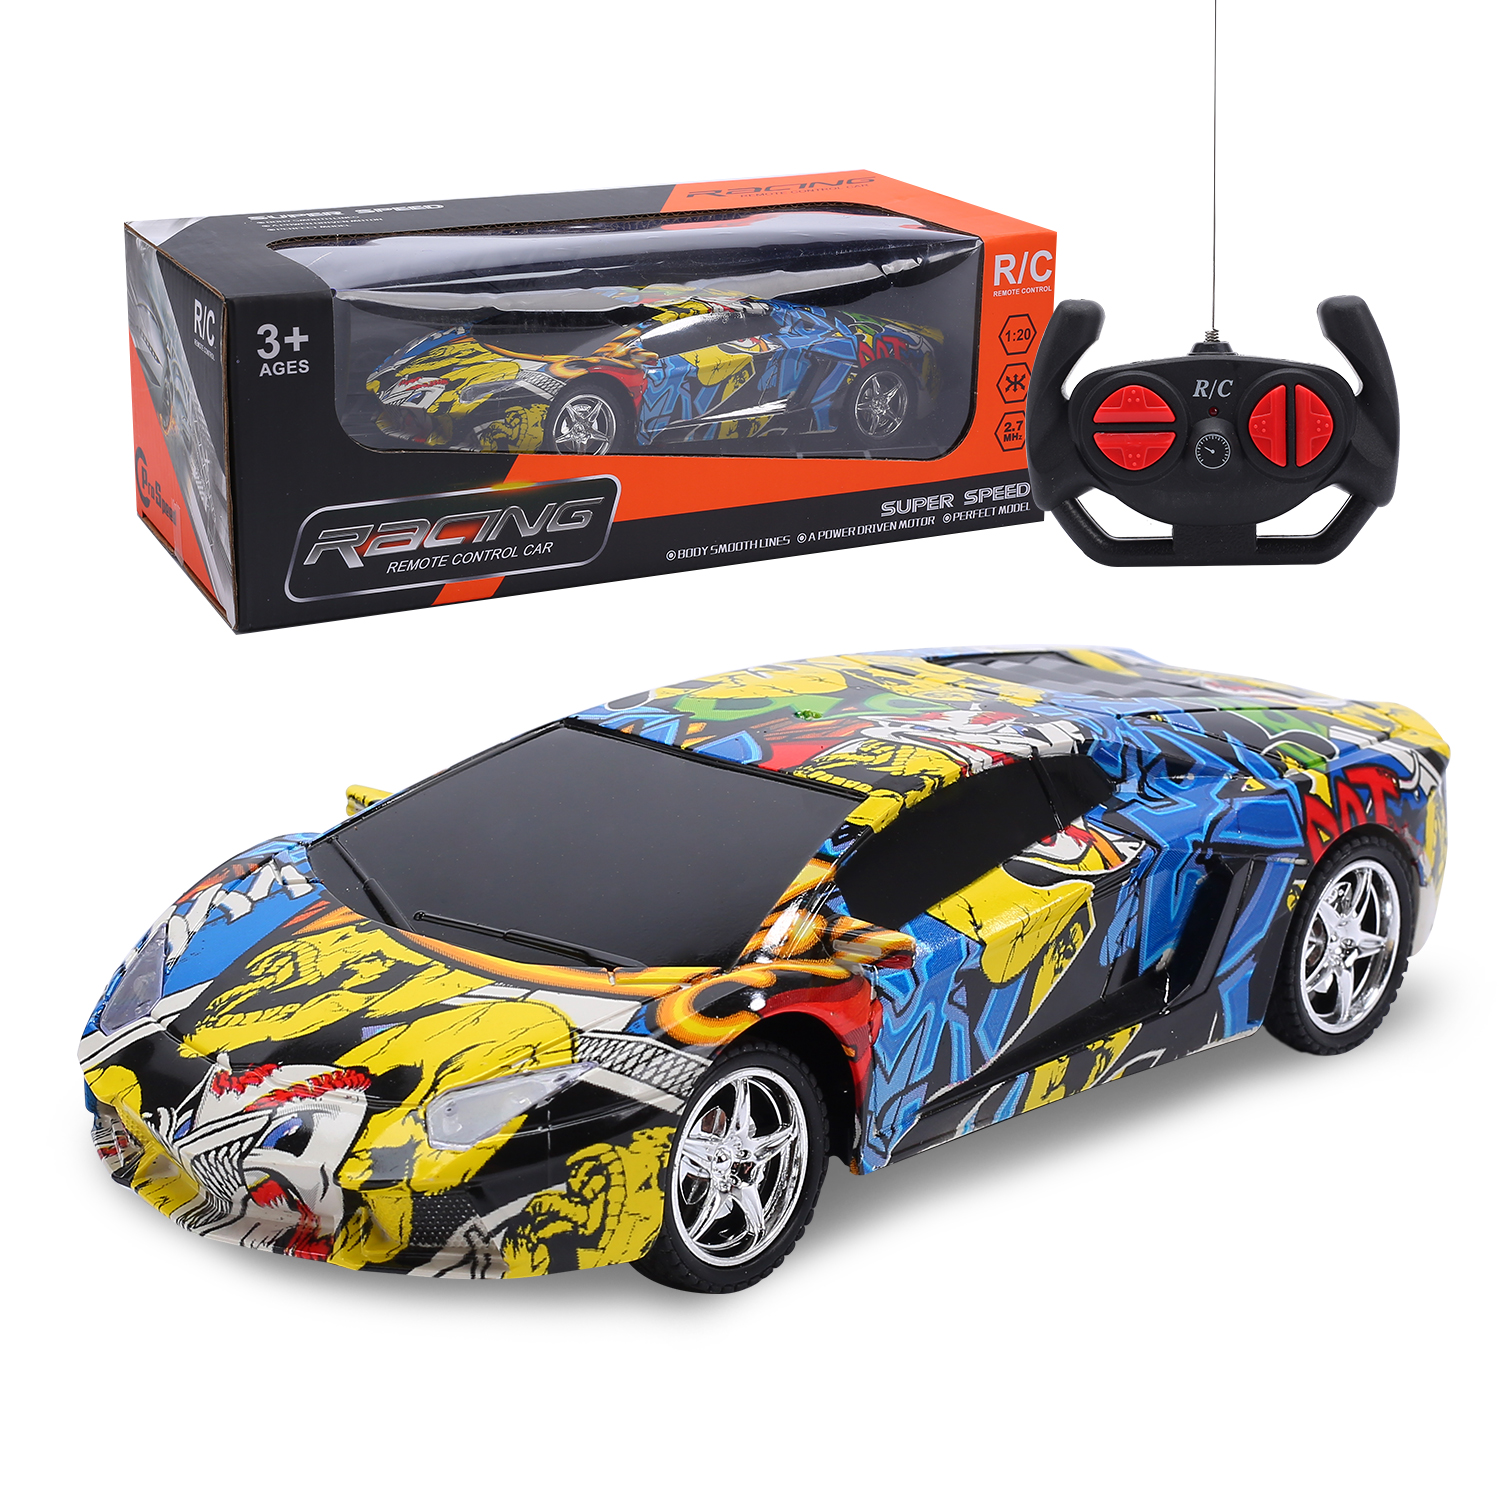 Remote Control Car,1/18 Scale Electric Graffiti RC Cars with Lights Sport Racing Hobby Toy Car Yellow Model Vehicle Xmas Gifts for Boys Girls Adults with Controller 